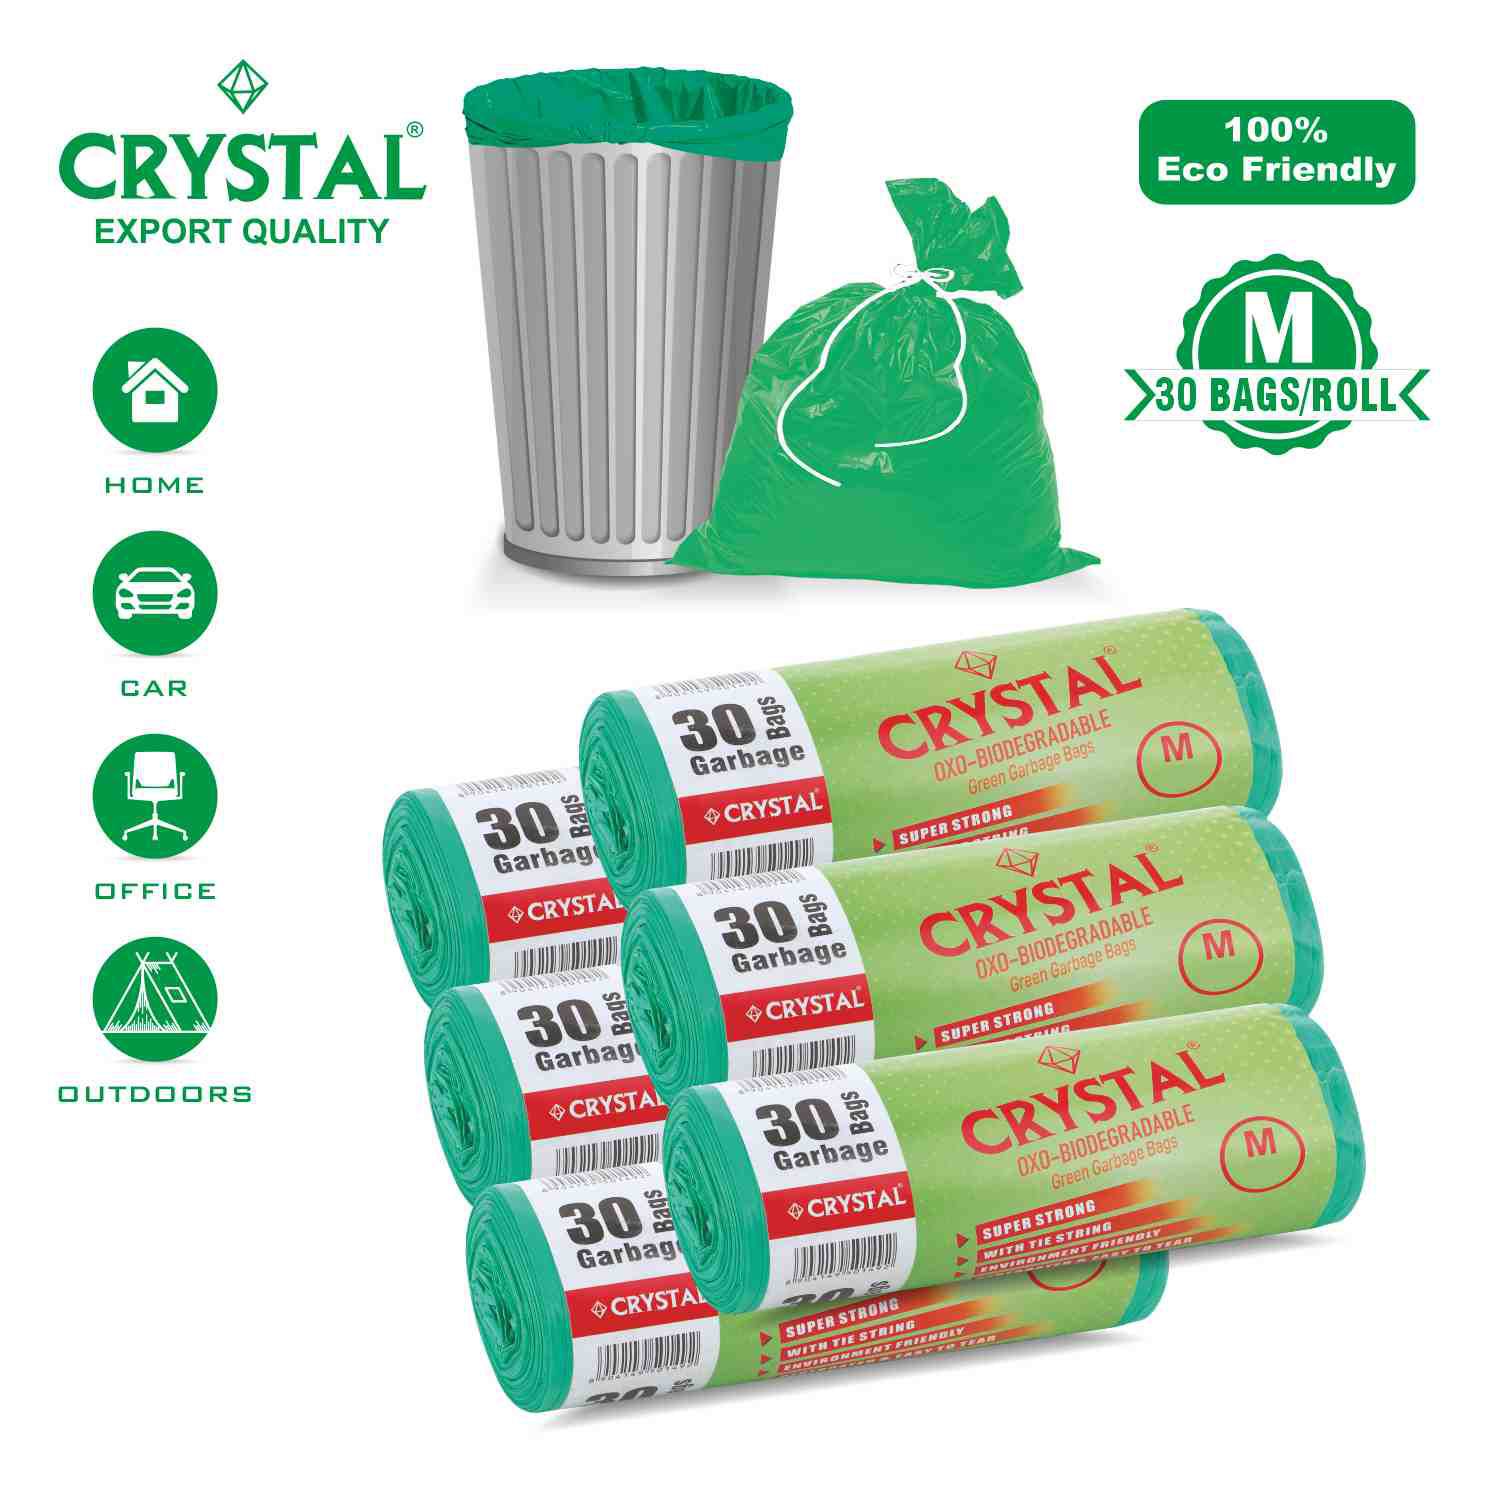     			Crystal Oxo Biodegradable Green Garbage Bags (19 x 21 inch, Medium) Pack of 6 (30 pieces each)